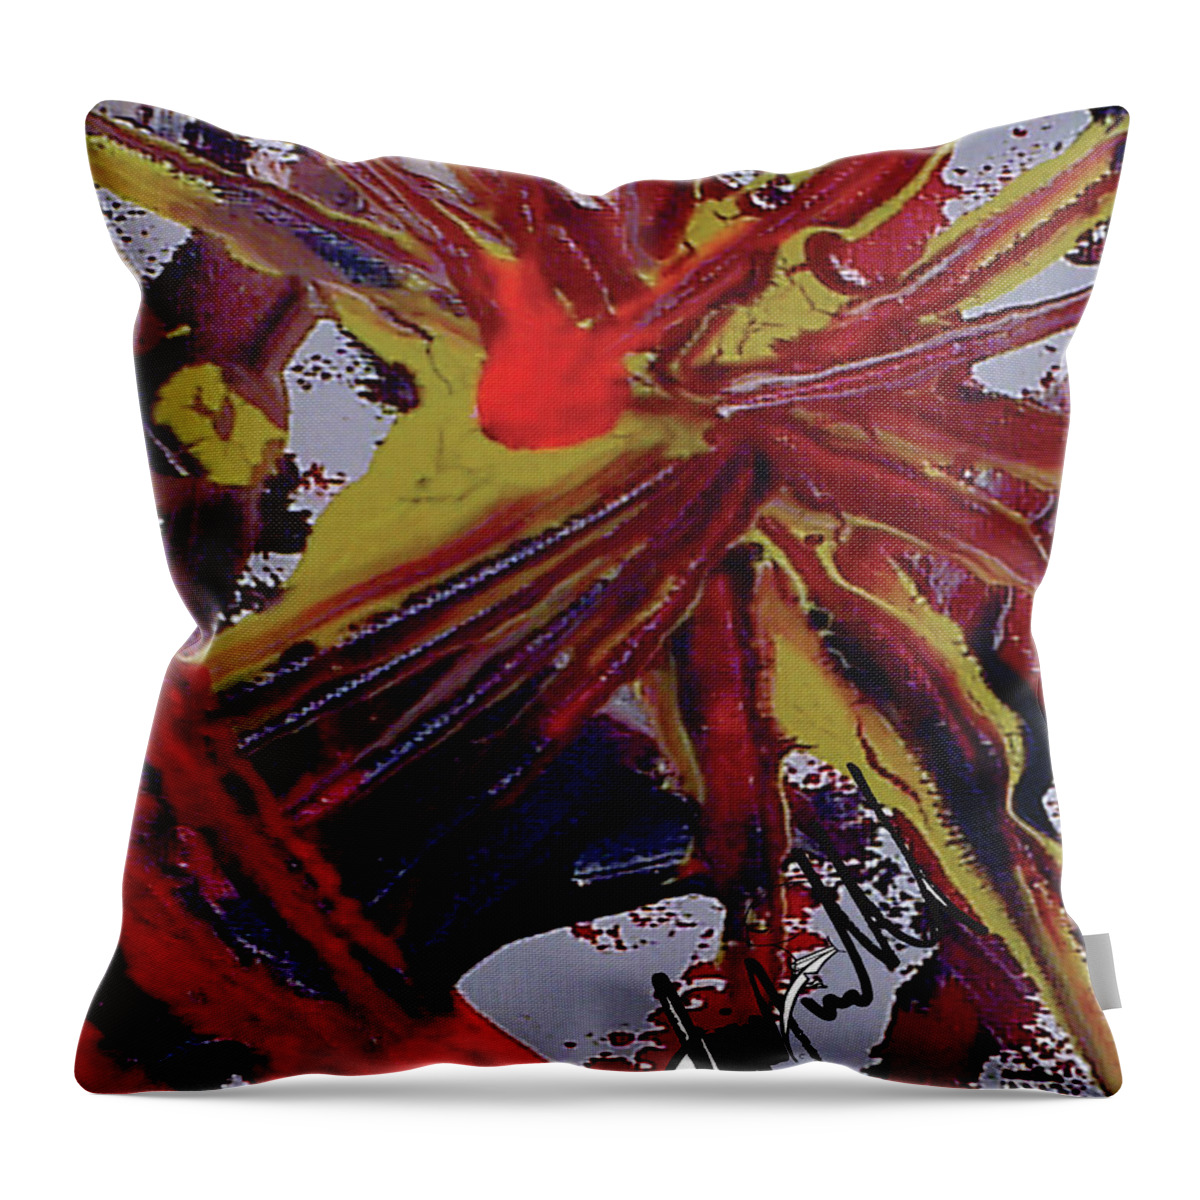  Throw Pillow featuring the digital art Gravitate #1 by Jimmy Williams